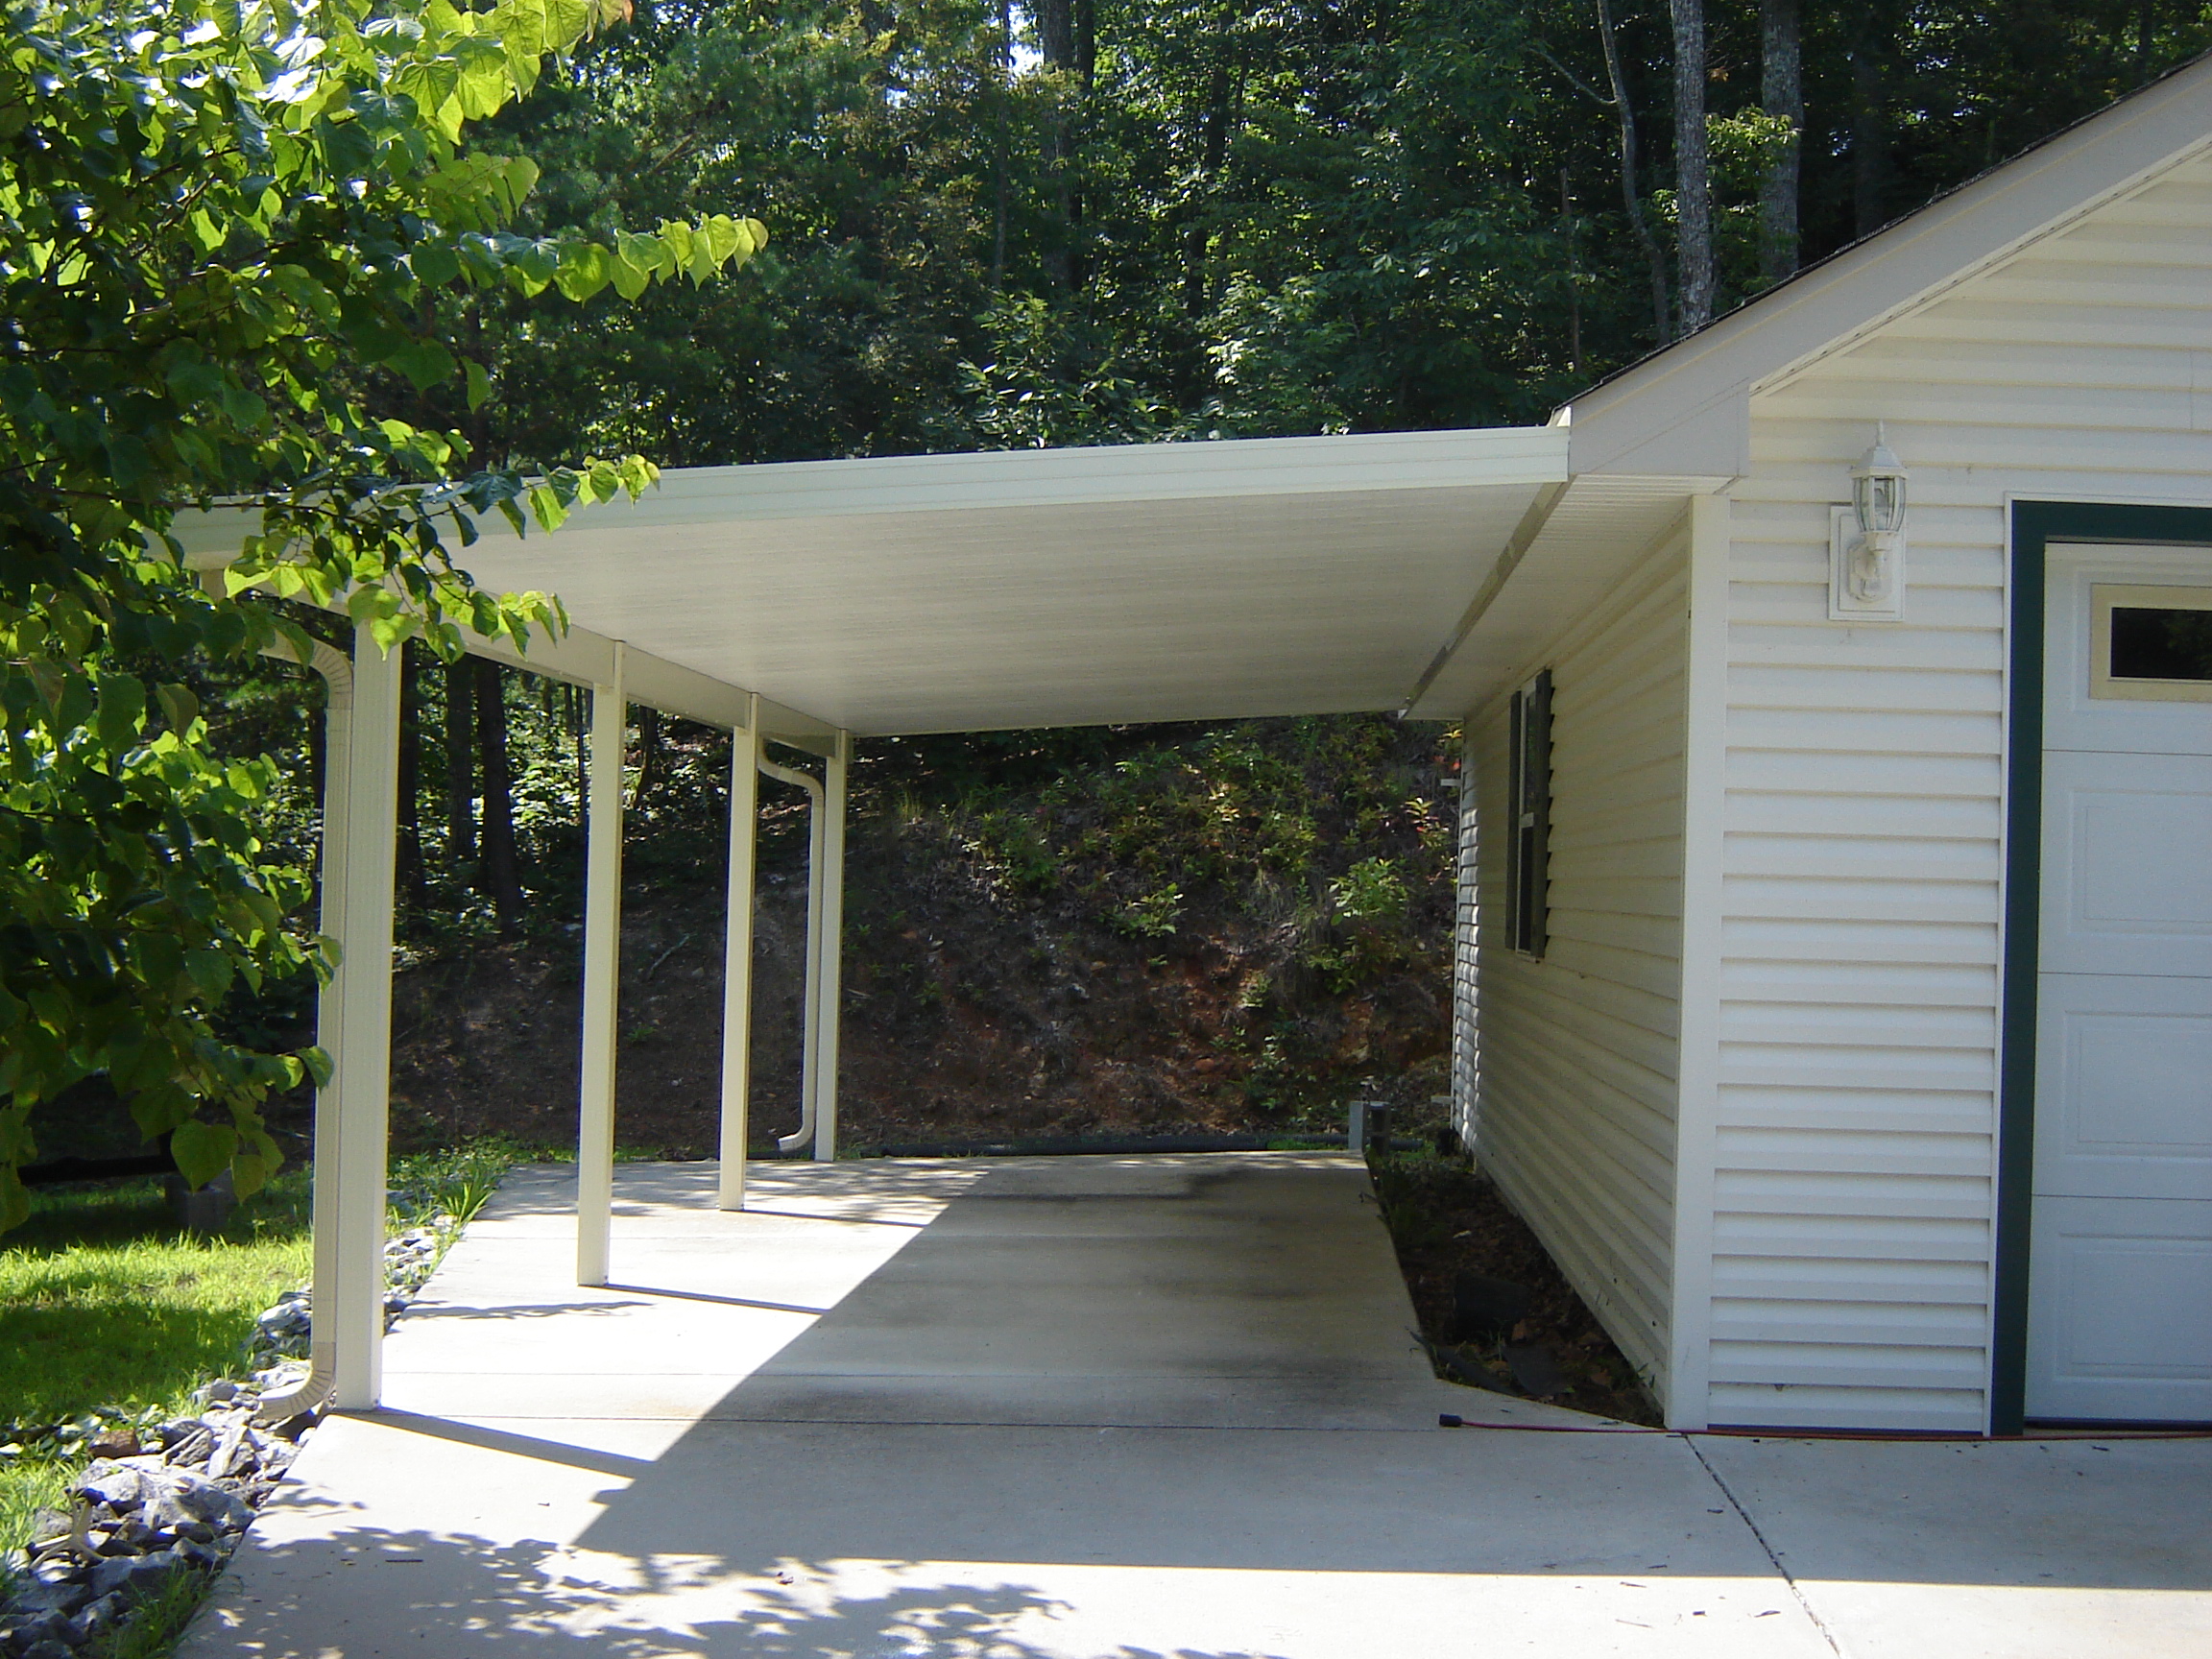 Carports & Patios, A Great Expansion to Your Home